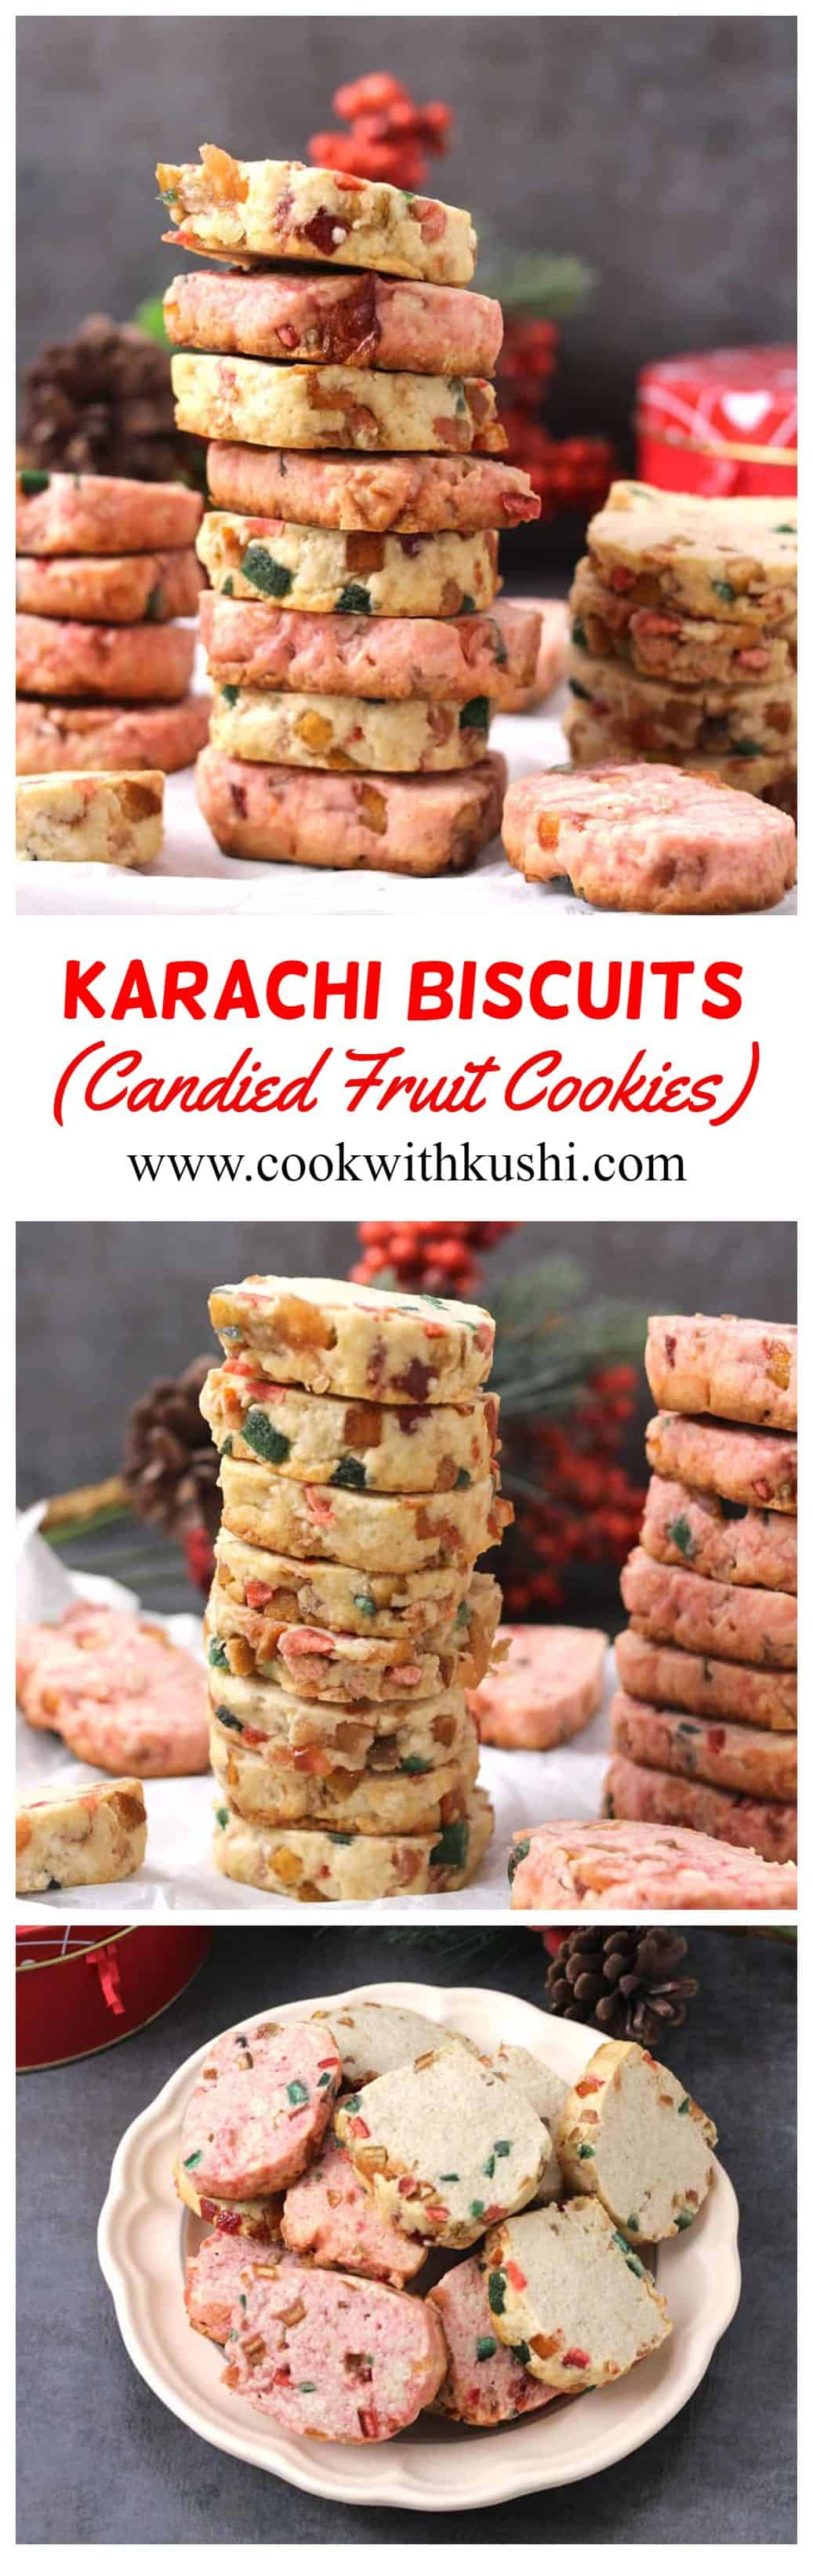 Candied Fruit Cookies | Karachi Biscuits Recipe - eggless, crispy and buttery melt in mouth cookies with candied fruit or tutti frutti bits. #HolidayCookies #ChristmasCookies #ThanksgivingDesserts #fruitbiscuits #egglesstuttifrutticookies #indianbakerybiscuits 